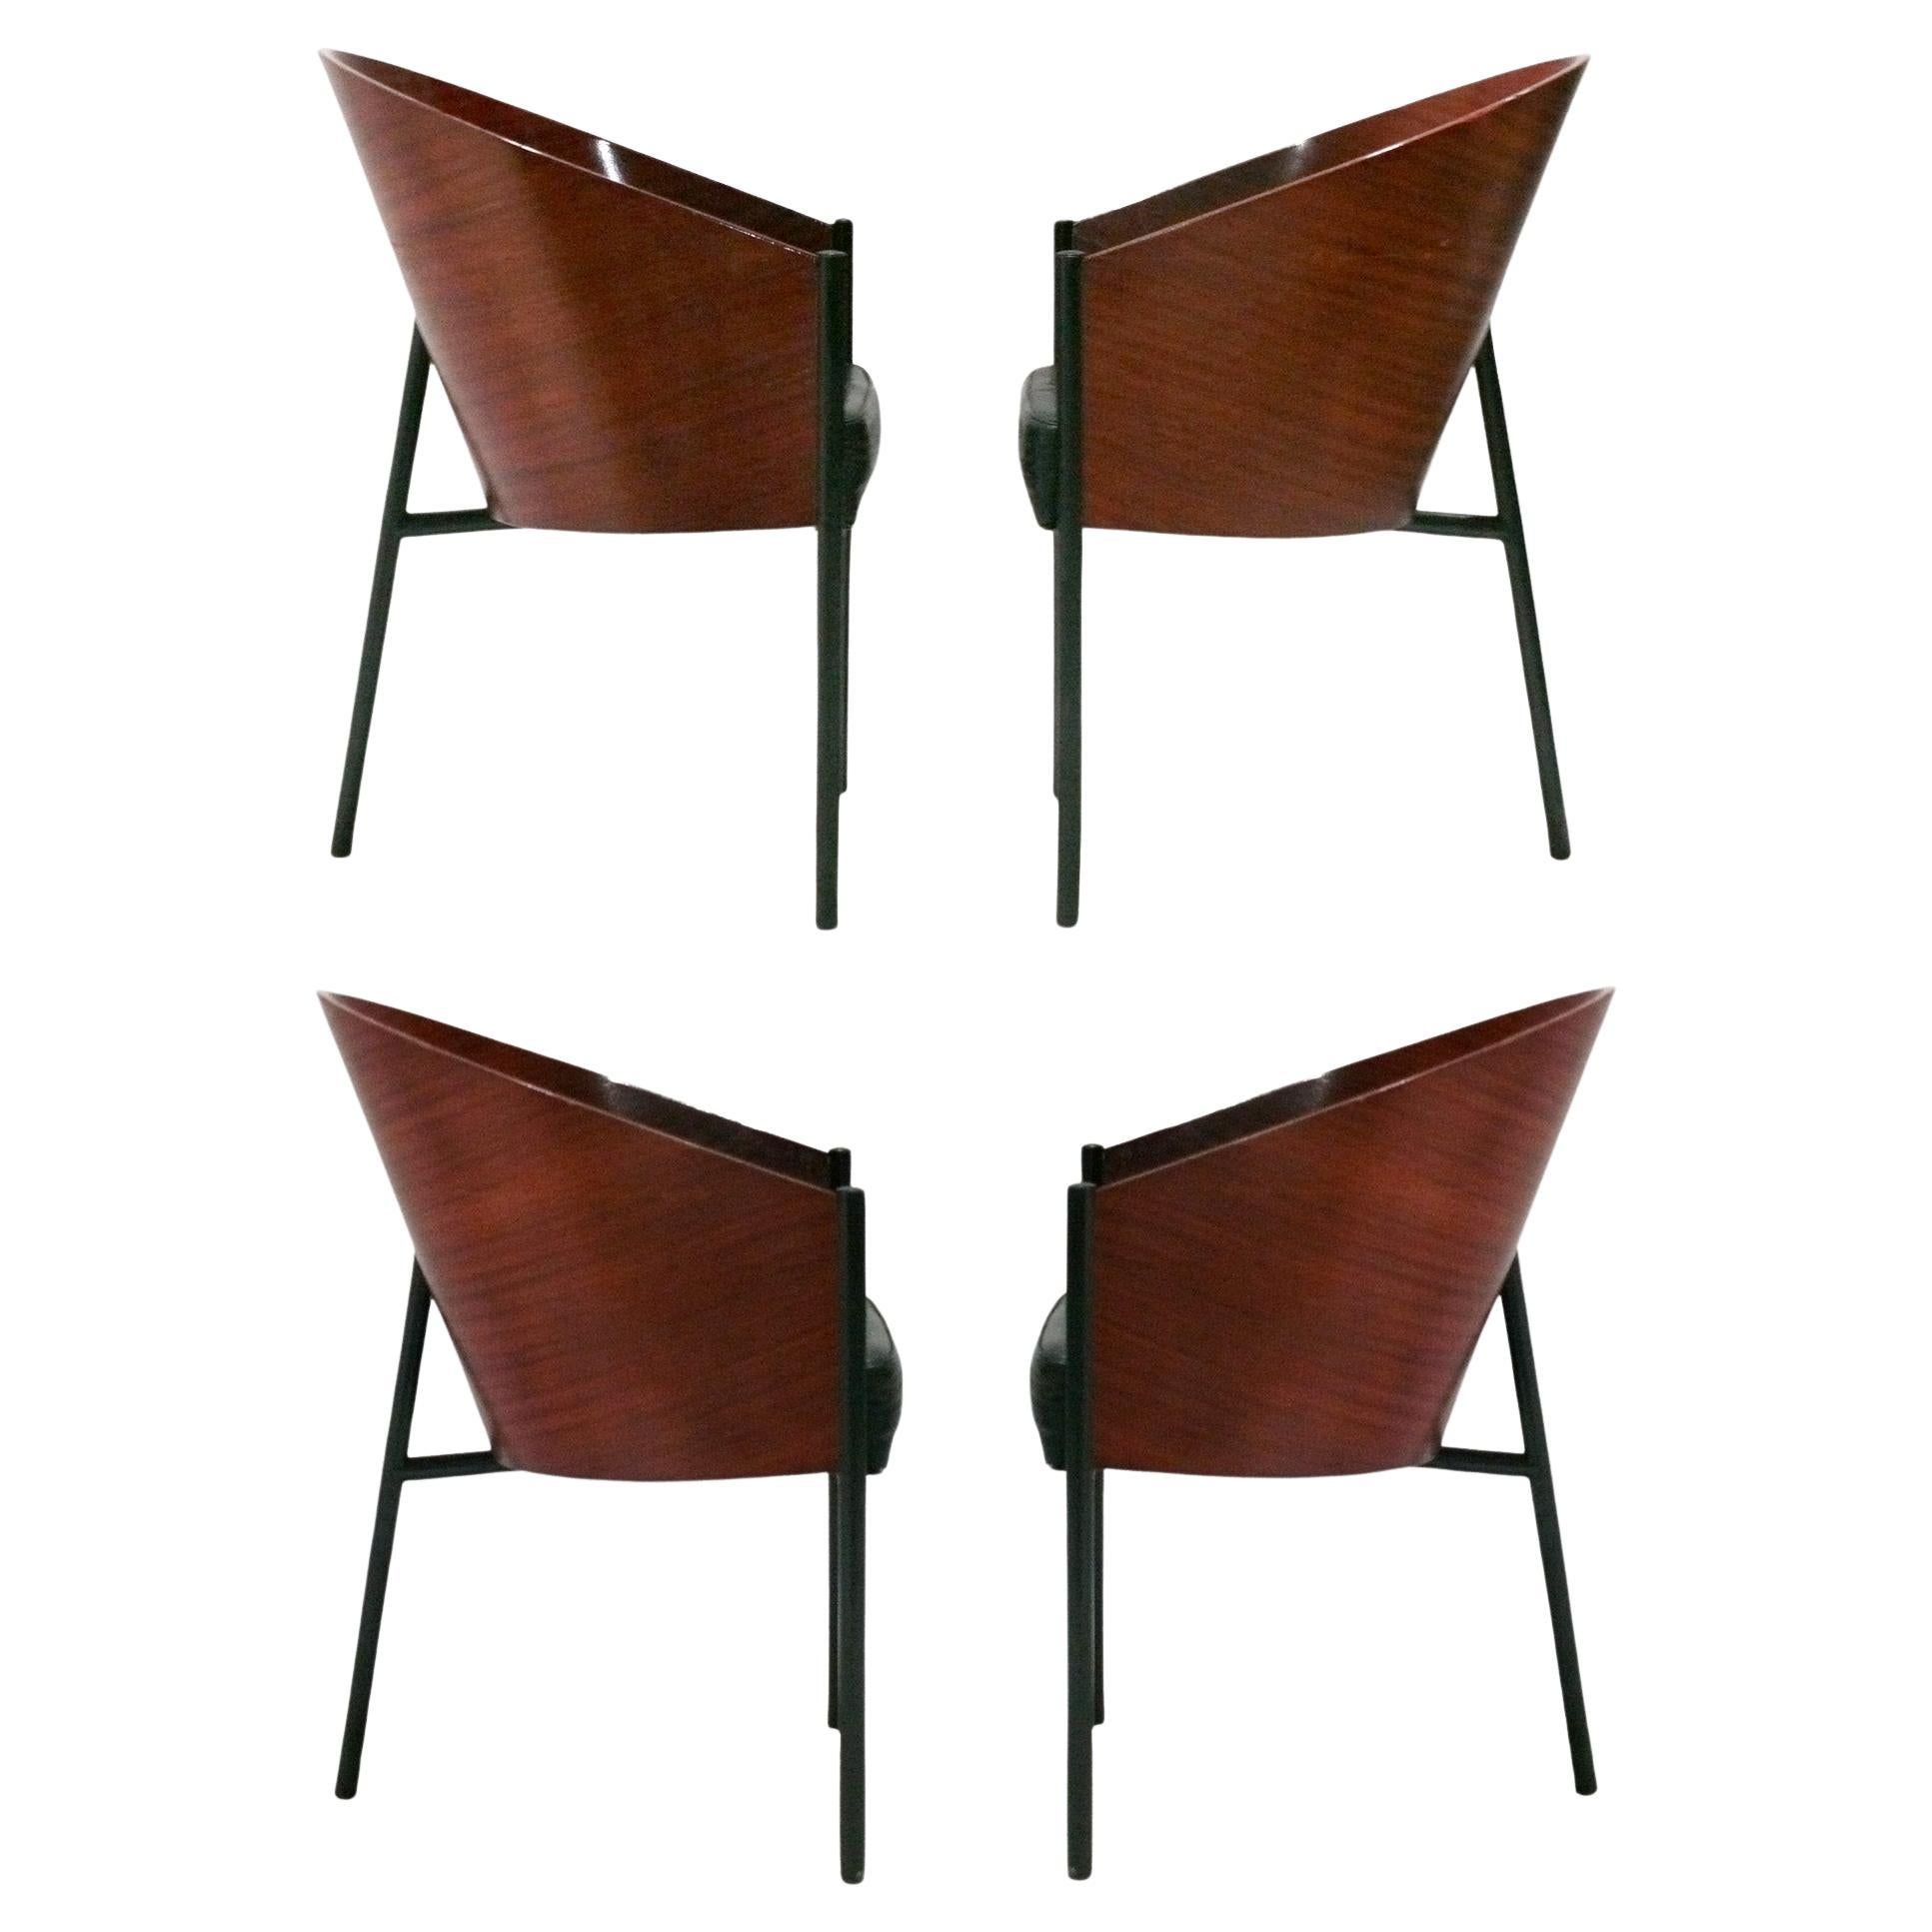 Philippe Starck Sculptural Dining Chairs for Driade, circa 1980s